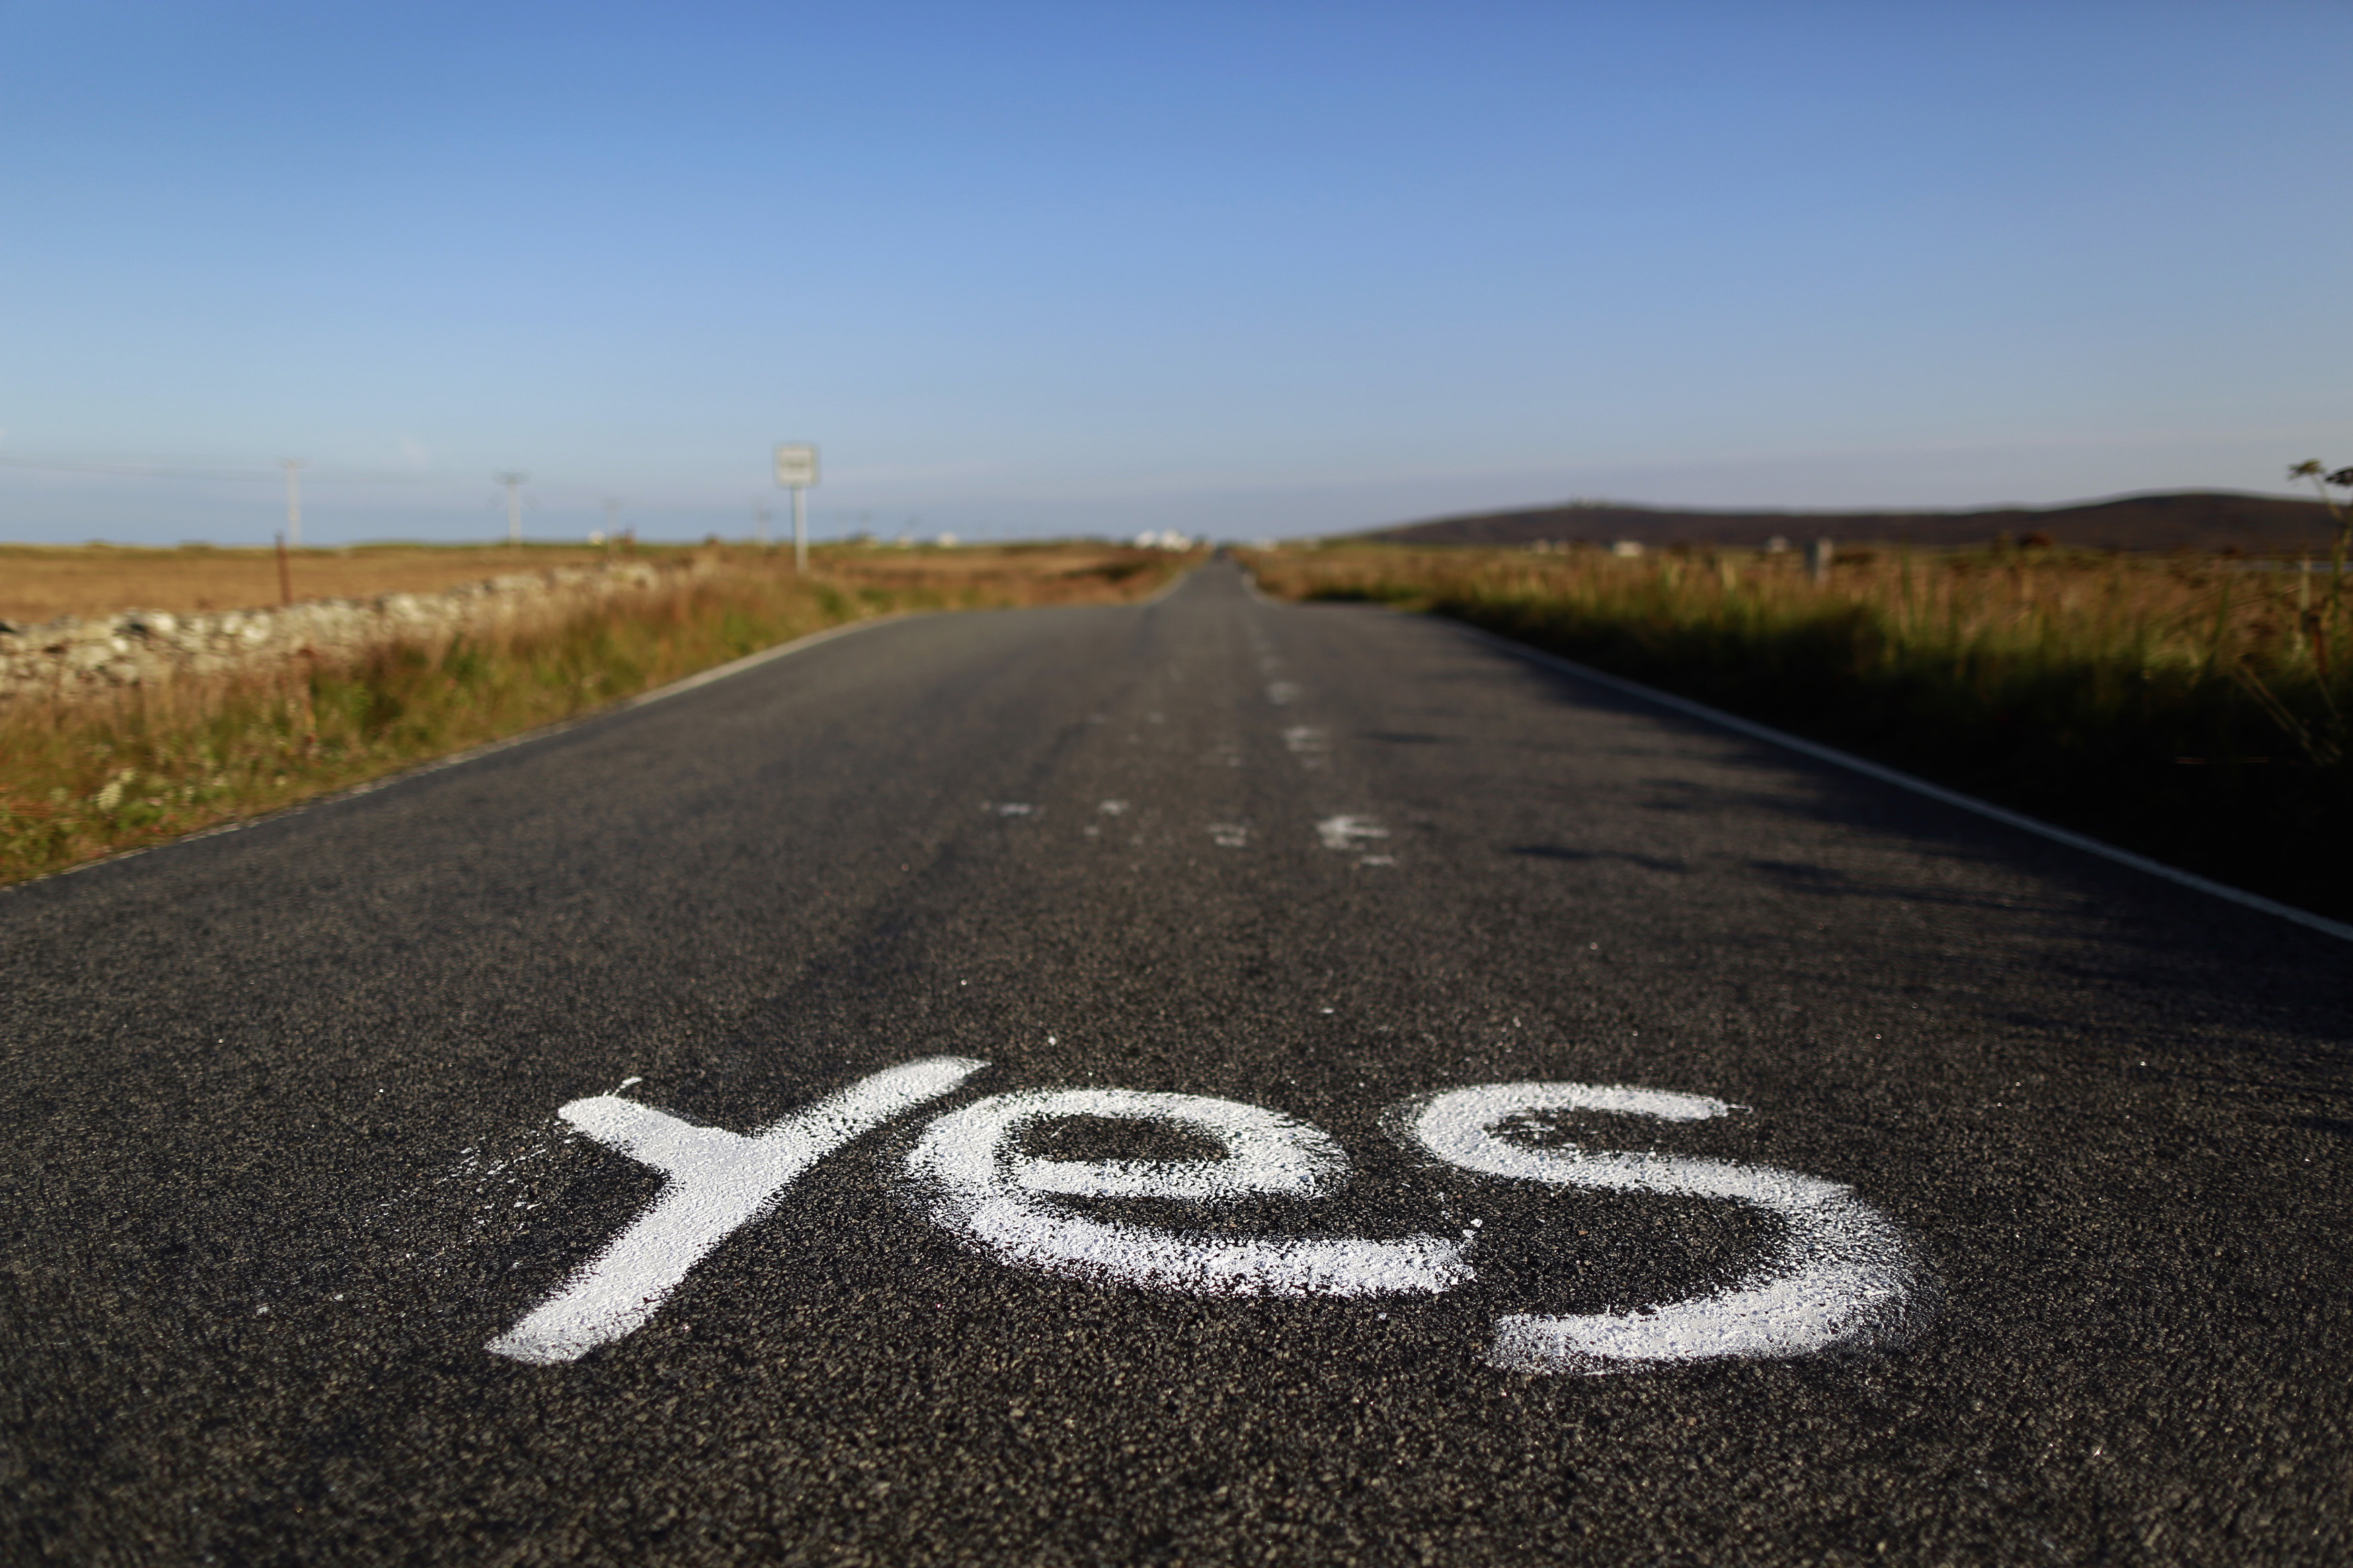 Graffiti supporting the "Yes" campaign is painted on a road in North Uist in the Outer Hebrides Sept. 17, 2014. (Cathal McNaughton—Reuters)